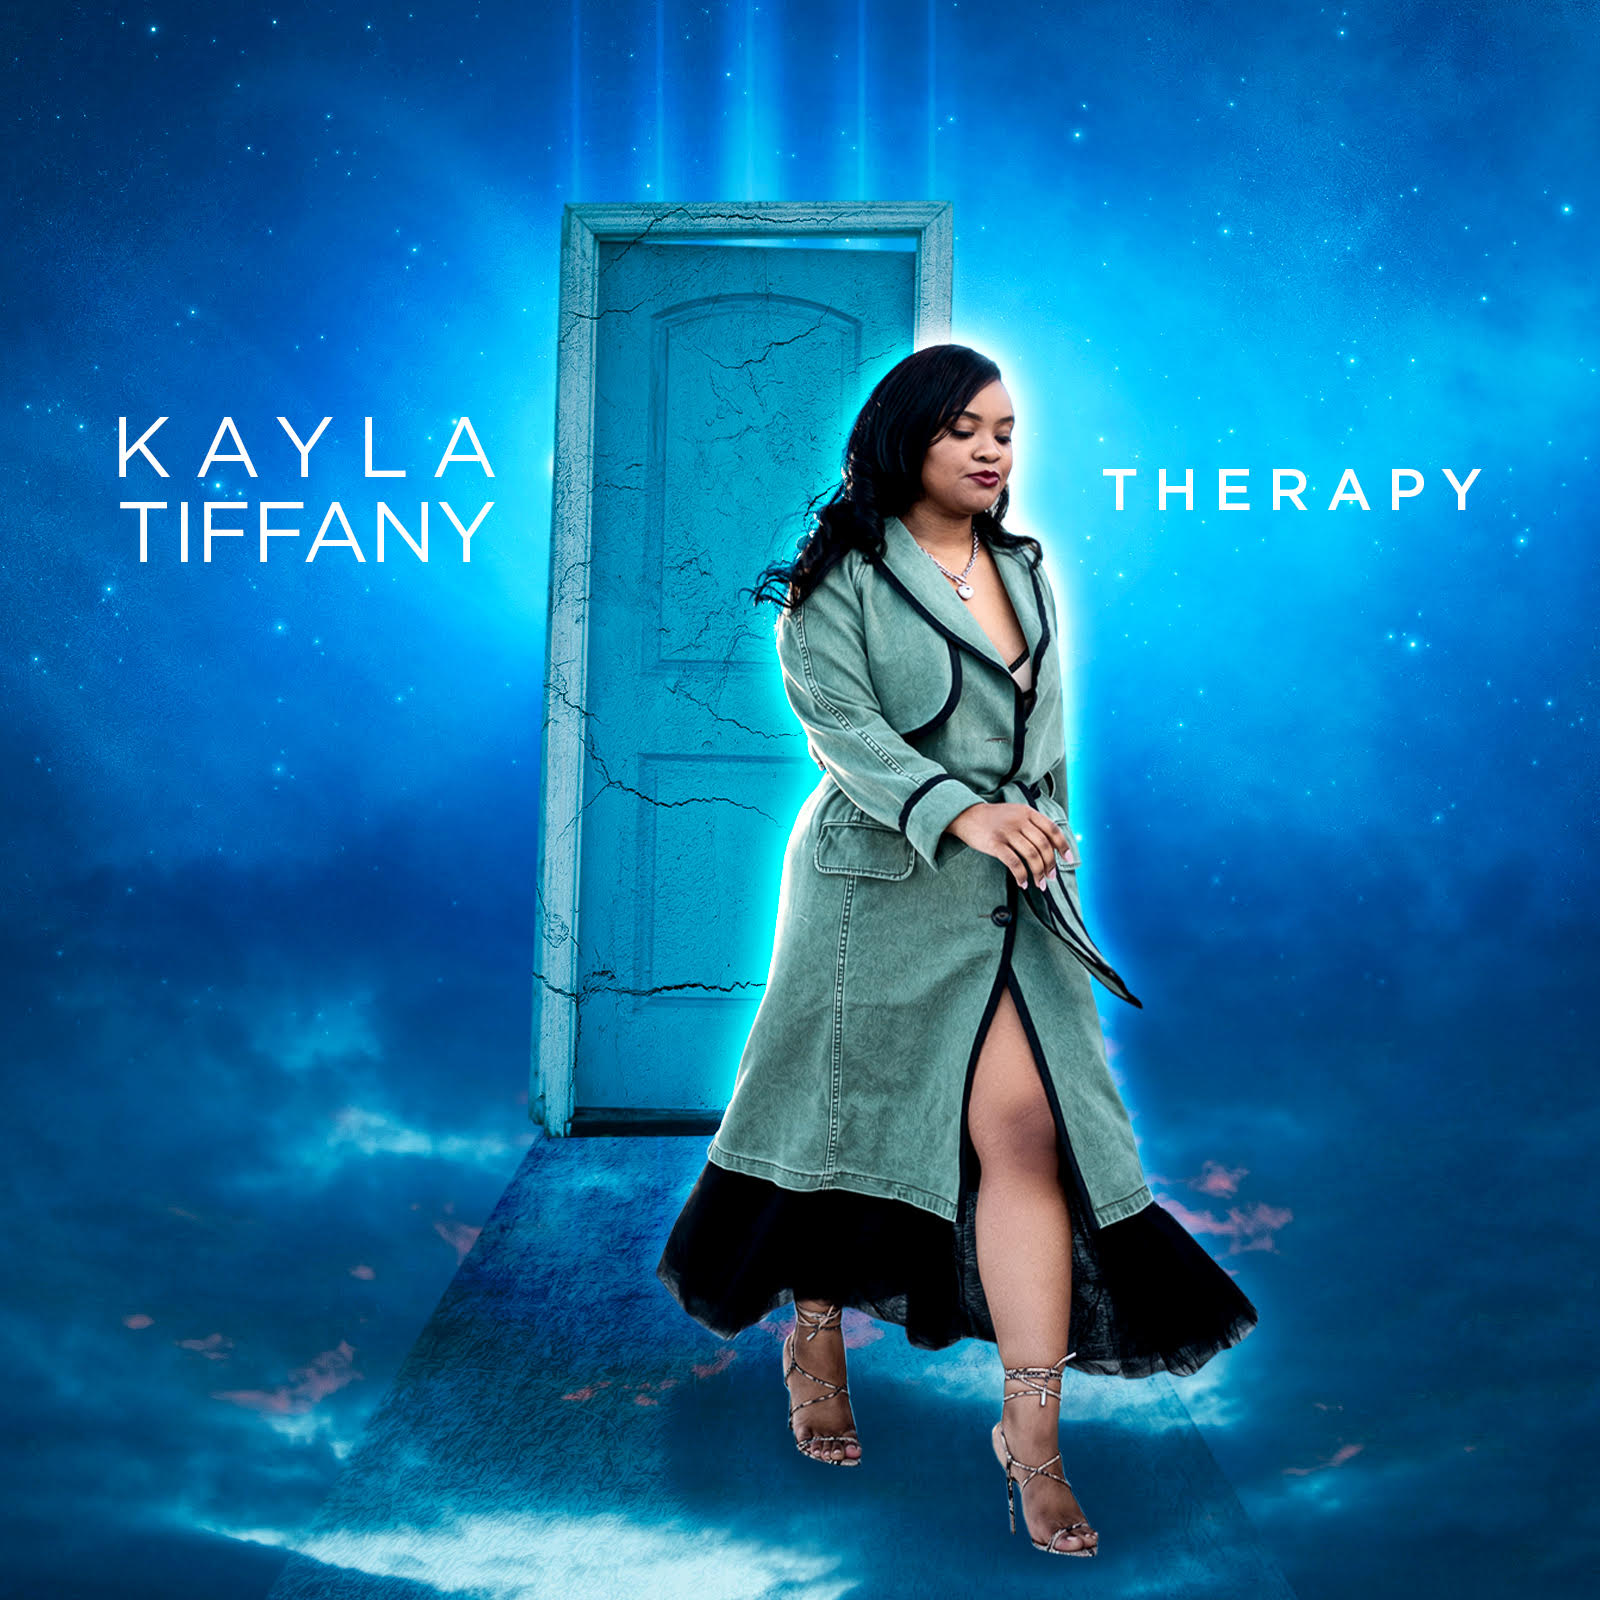 JoJo Hailey's Daughter Kayla Tiffany Releases Debut Single "Therapy"